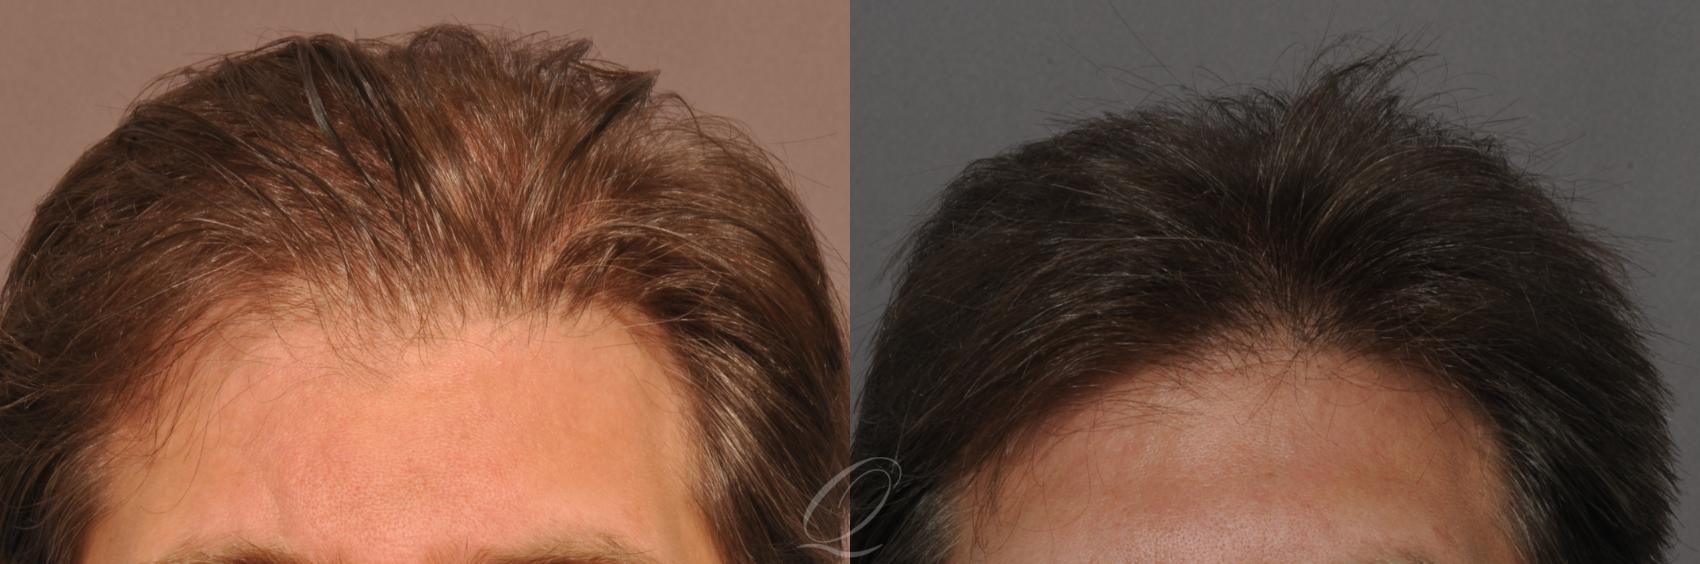 FUT Case 1030 Before & After View #1 | Rochester, NY | Quatela Center for Hair Restoration